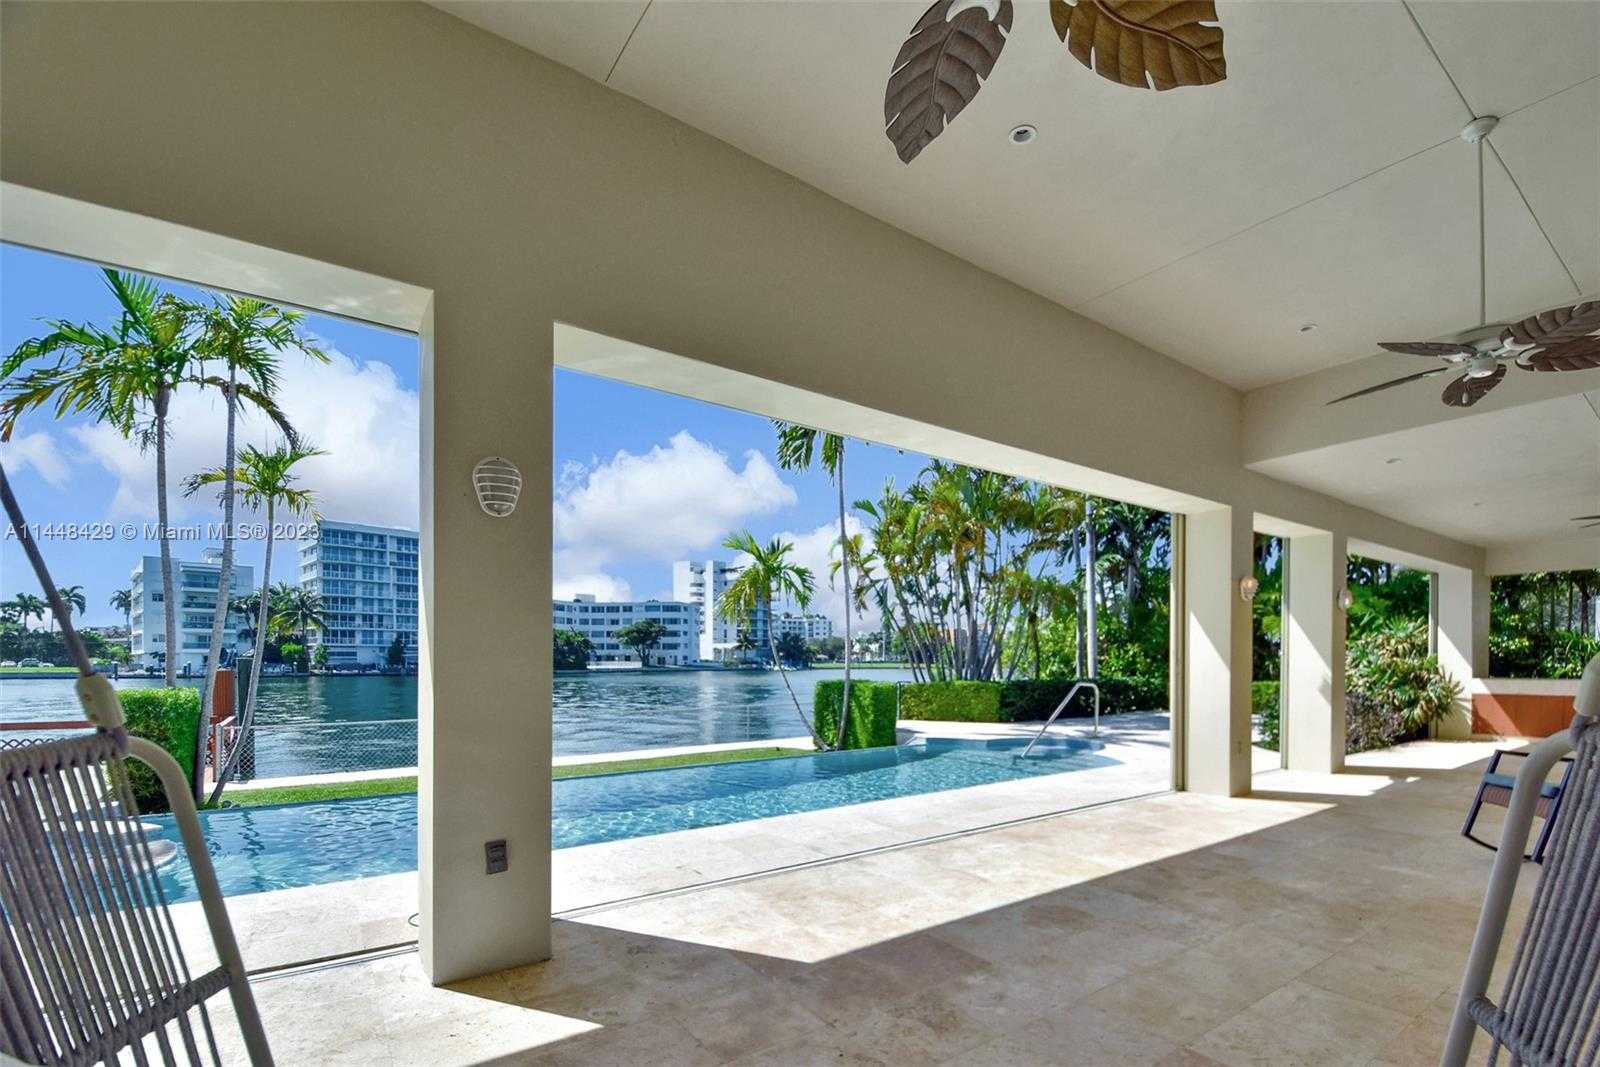 House in Bal Harbour, Florida 12307934